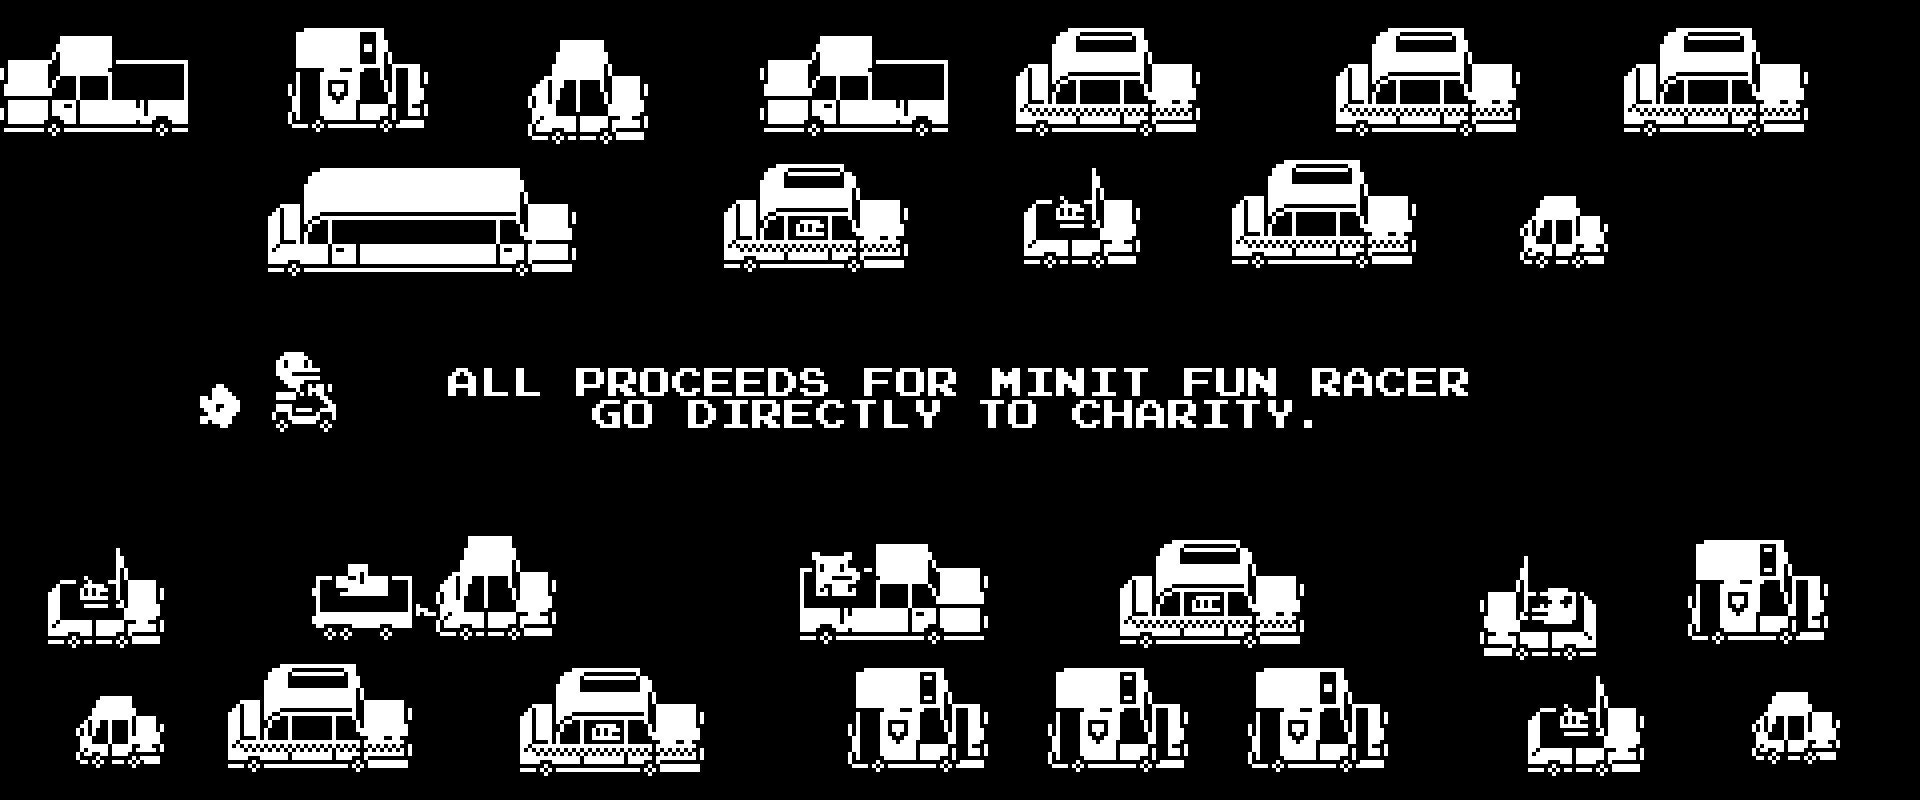 Find the best laptops for Minit Fun Racer